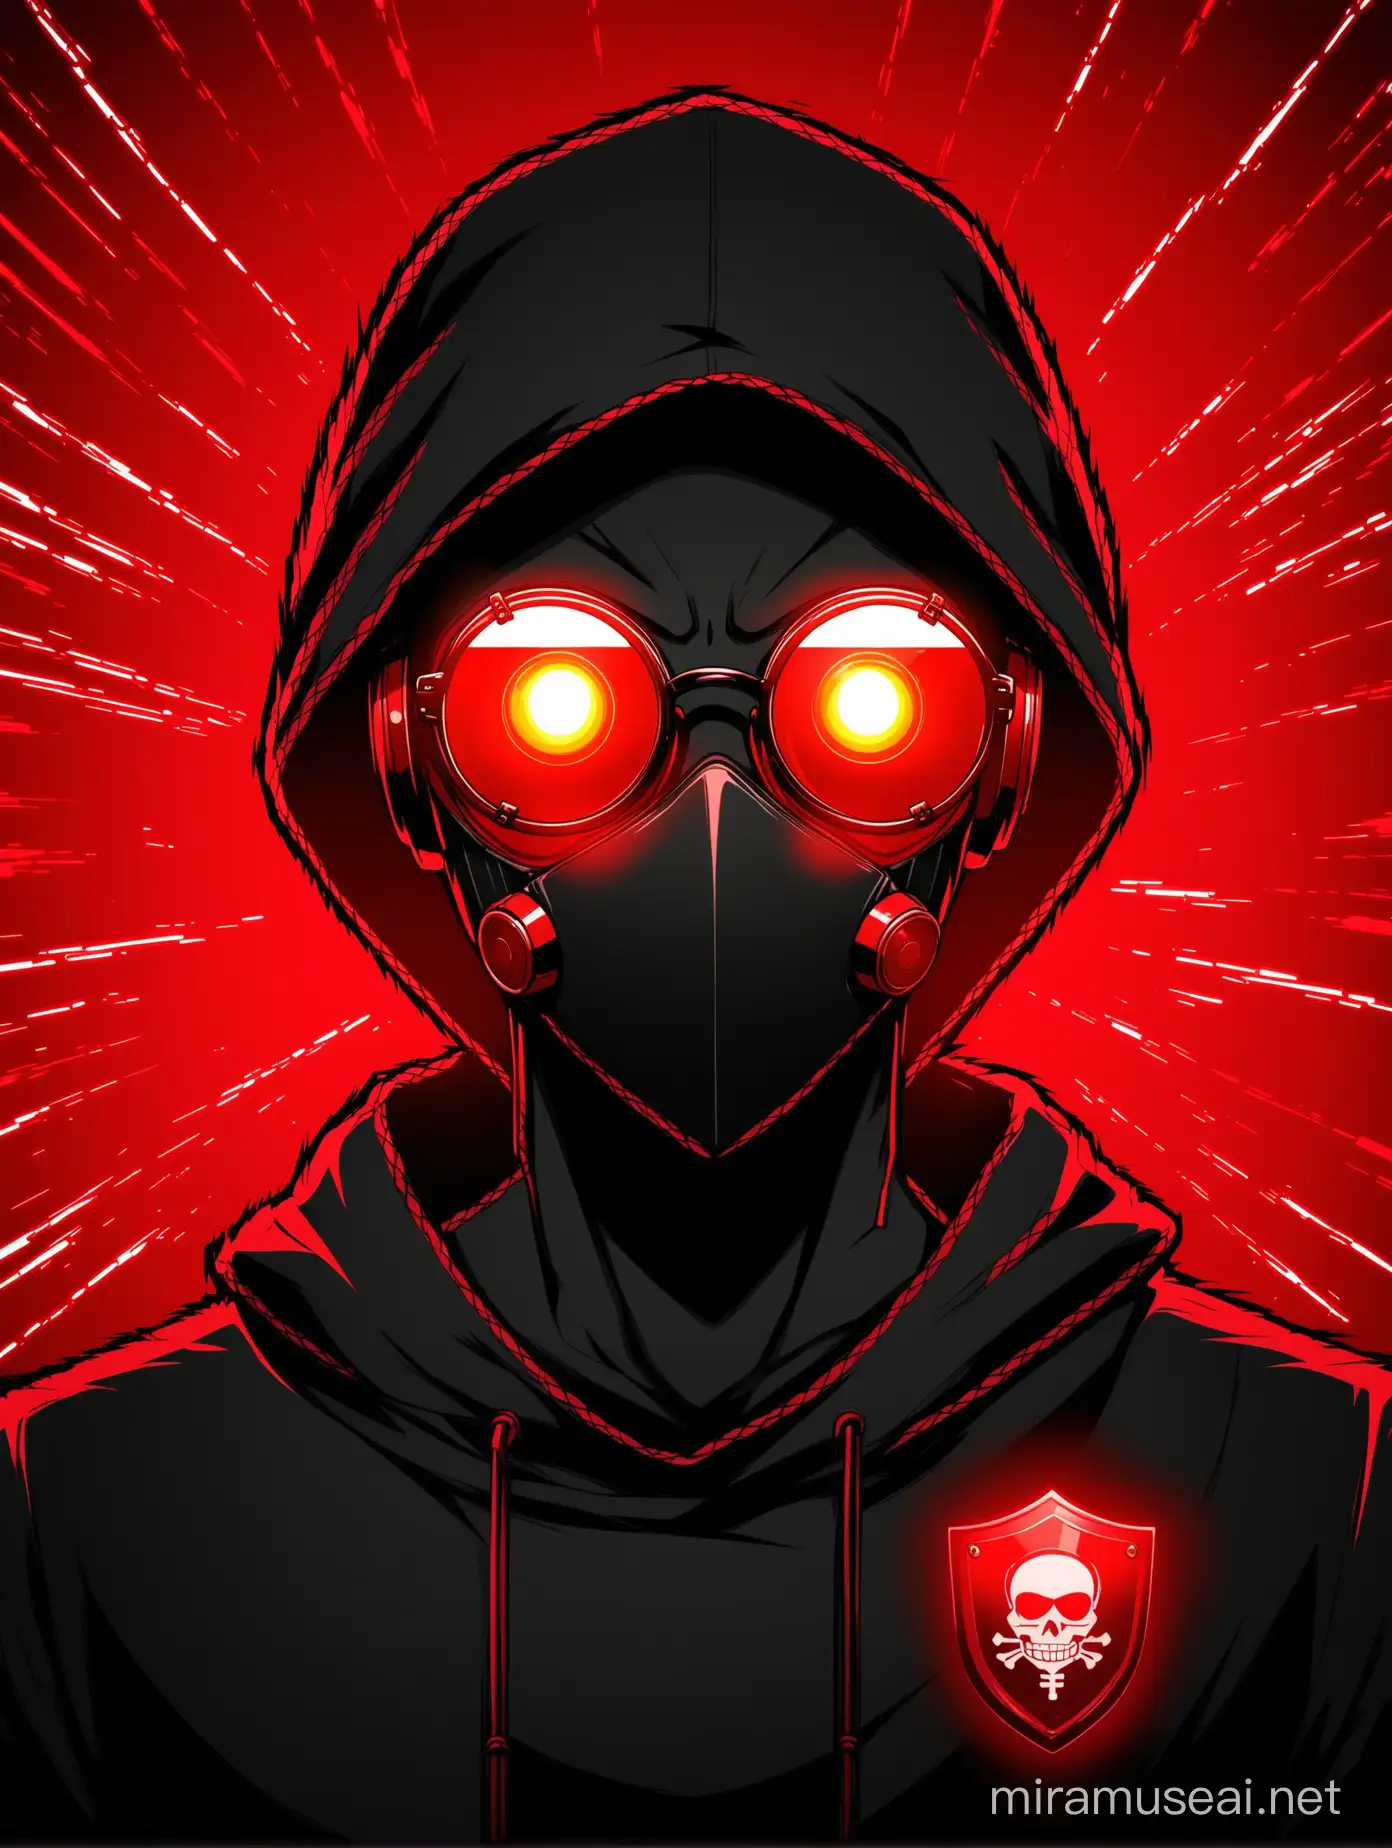 Cartoon Man Learning Hacking with Intense Red and Black Theme